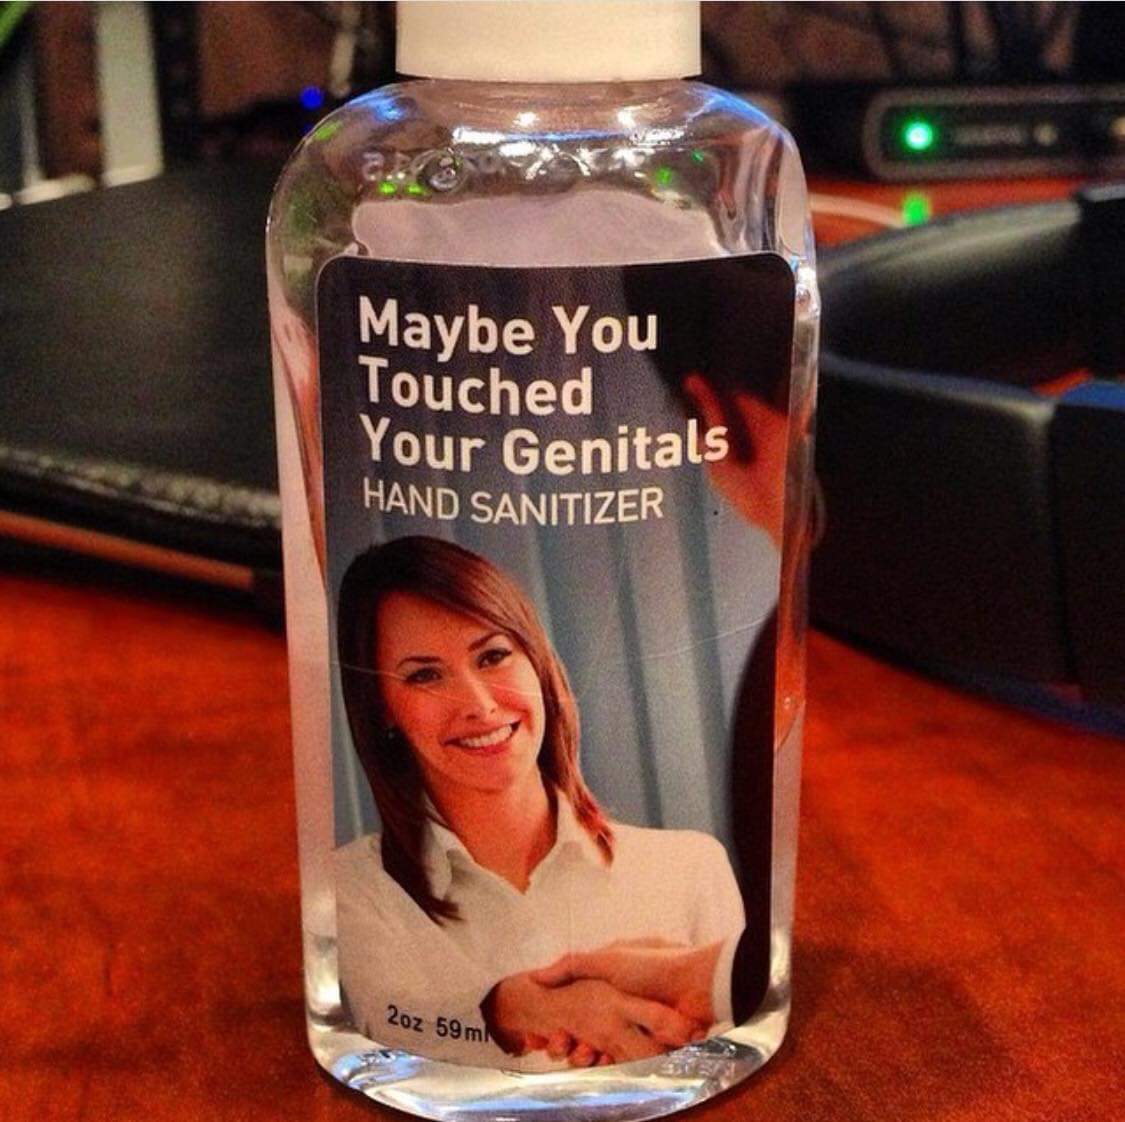 meme of a hand sanitizer for use after shaking hands